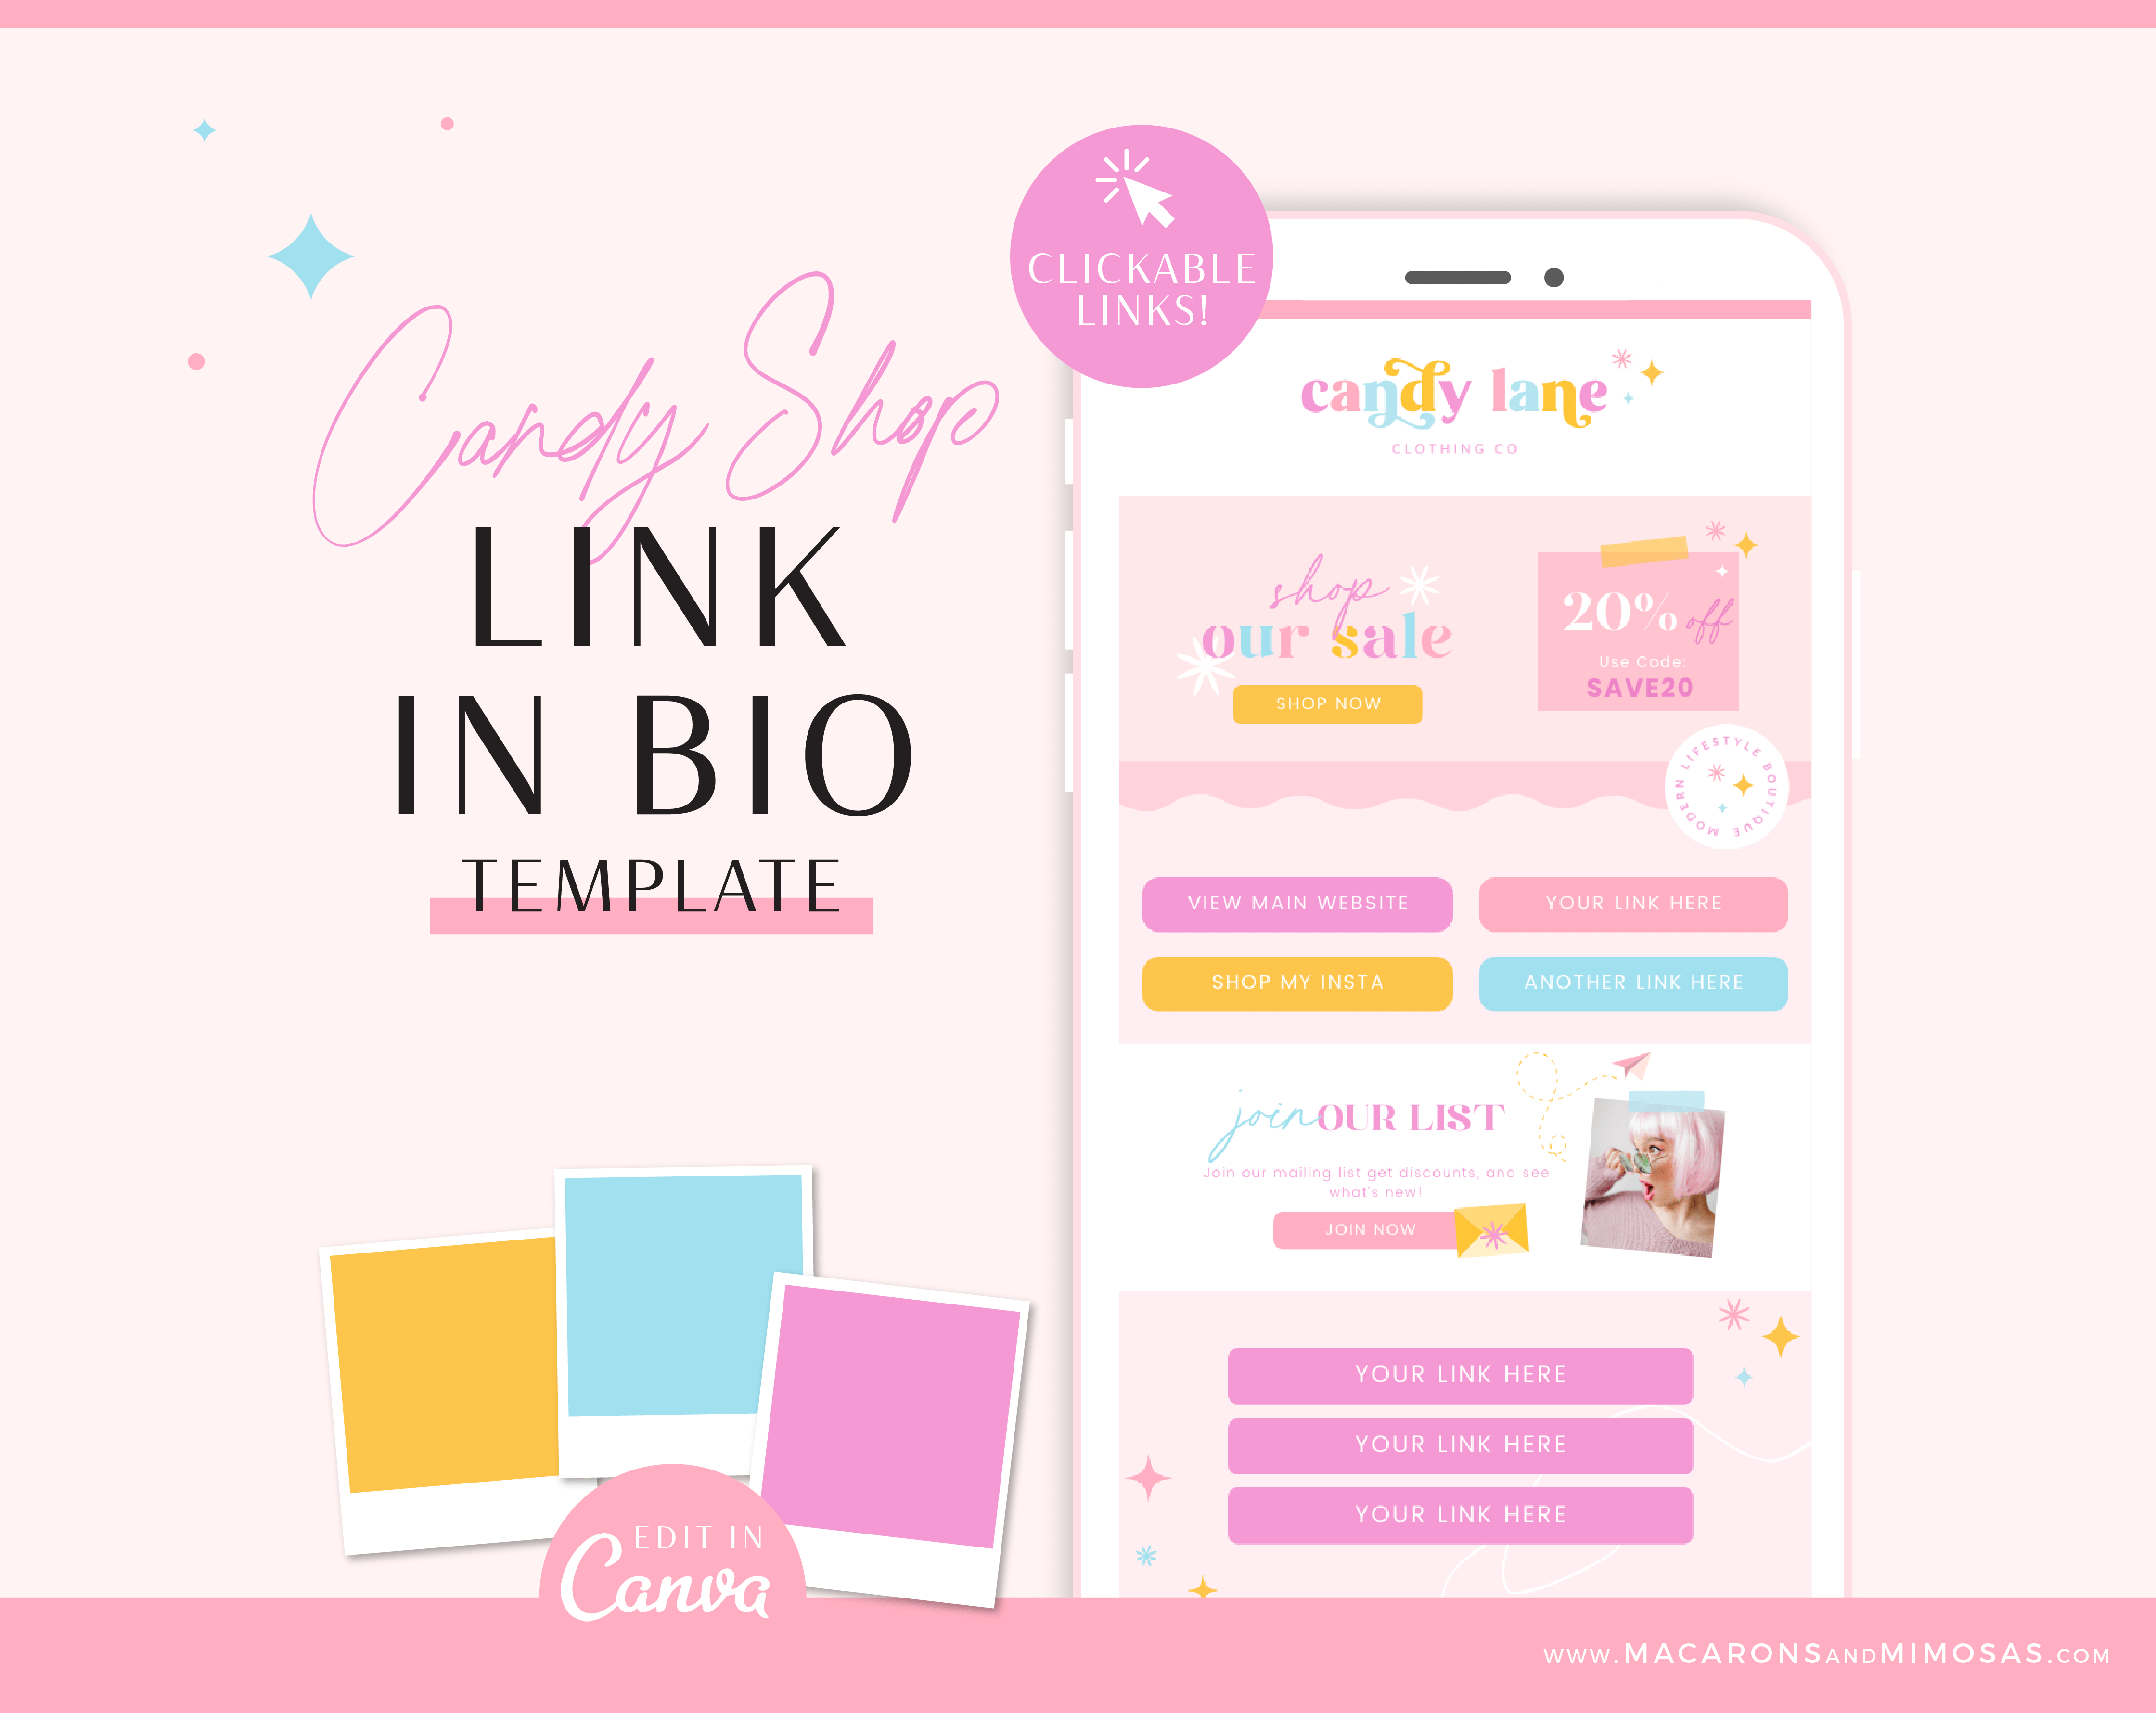 Retro Pink Link in Bio Website Template for Canva, One-page website design for Instagram Profile with pink, orange, and sparkling stars and hearts